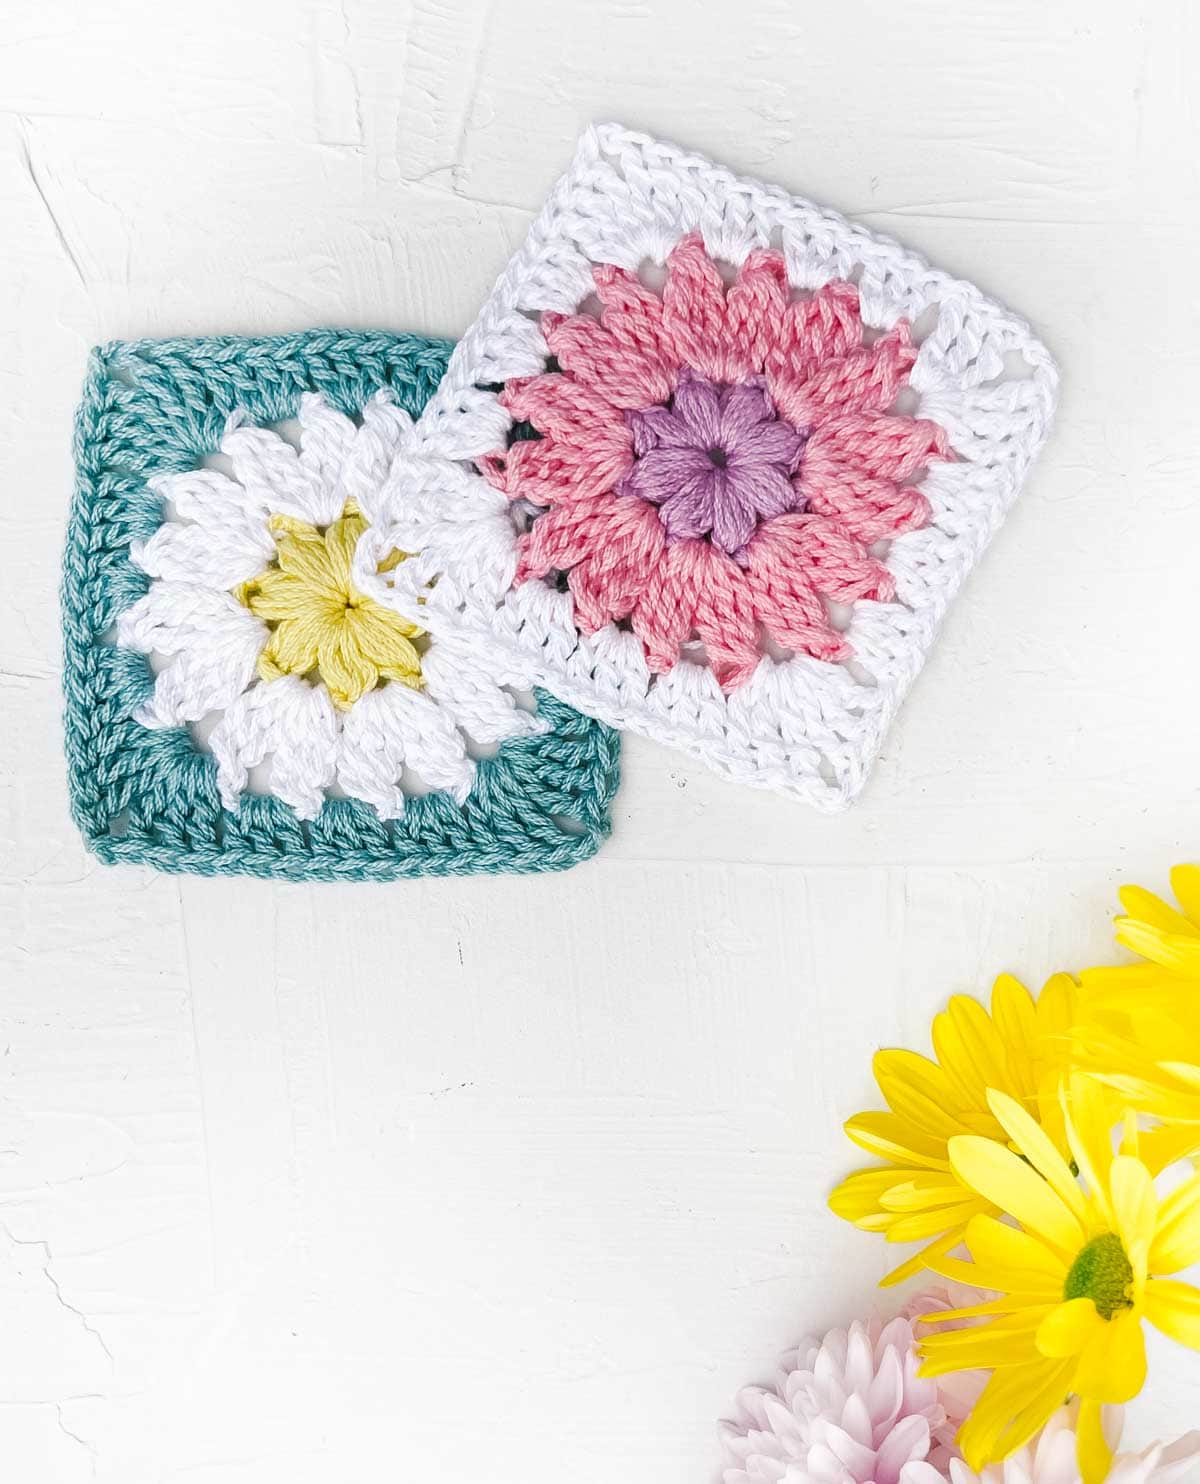 Two crocheted granny squares with round flower designs in the centers.